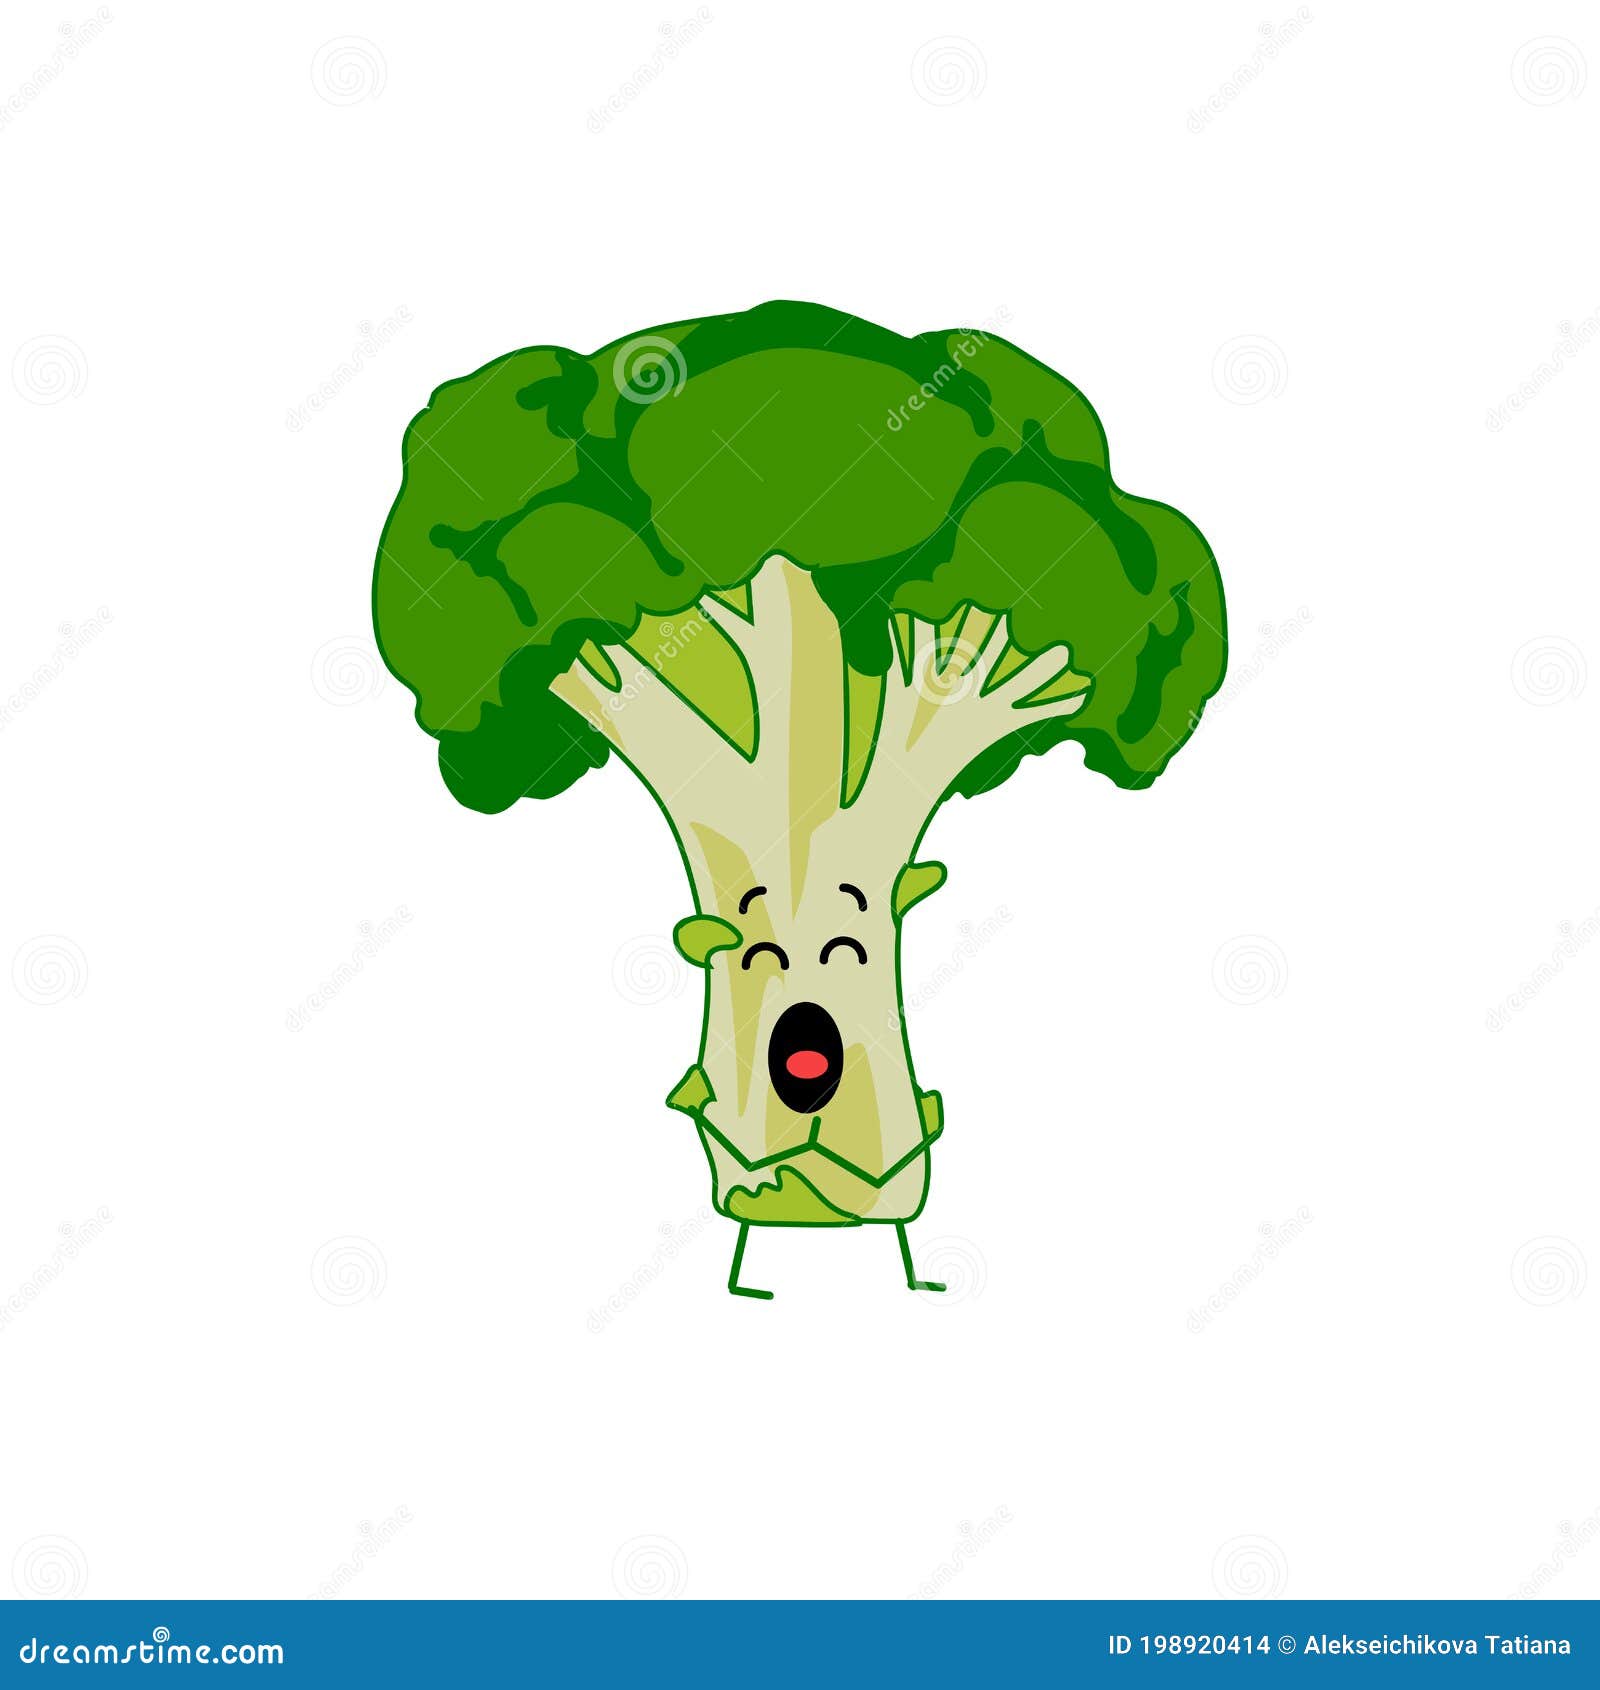 Cute Broccoli Cartoon Character Stock Vector - Illustration of character,  collection: 198920414